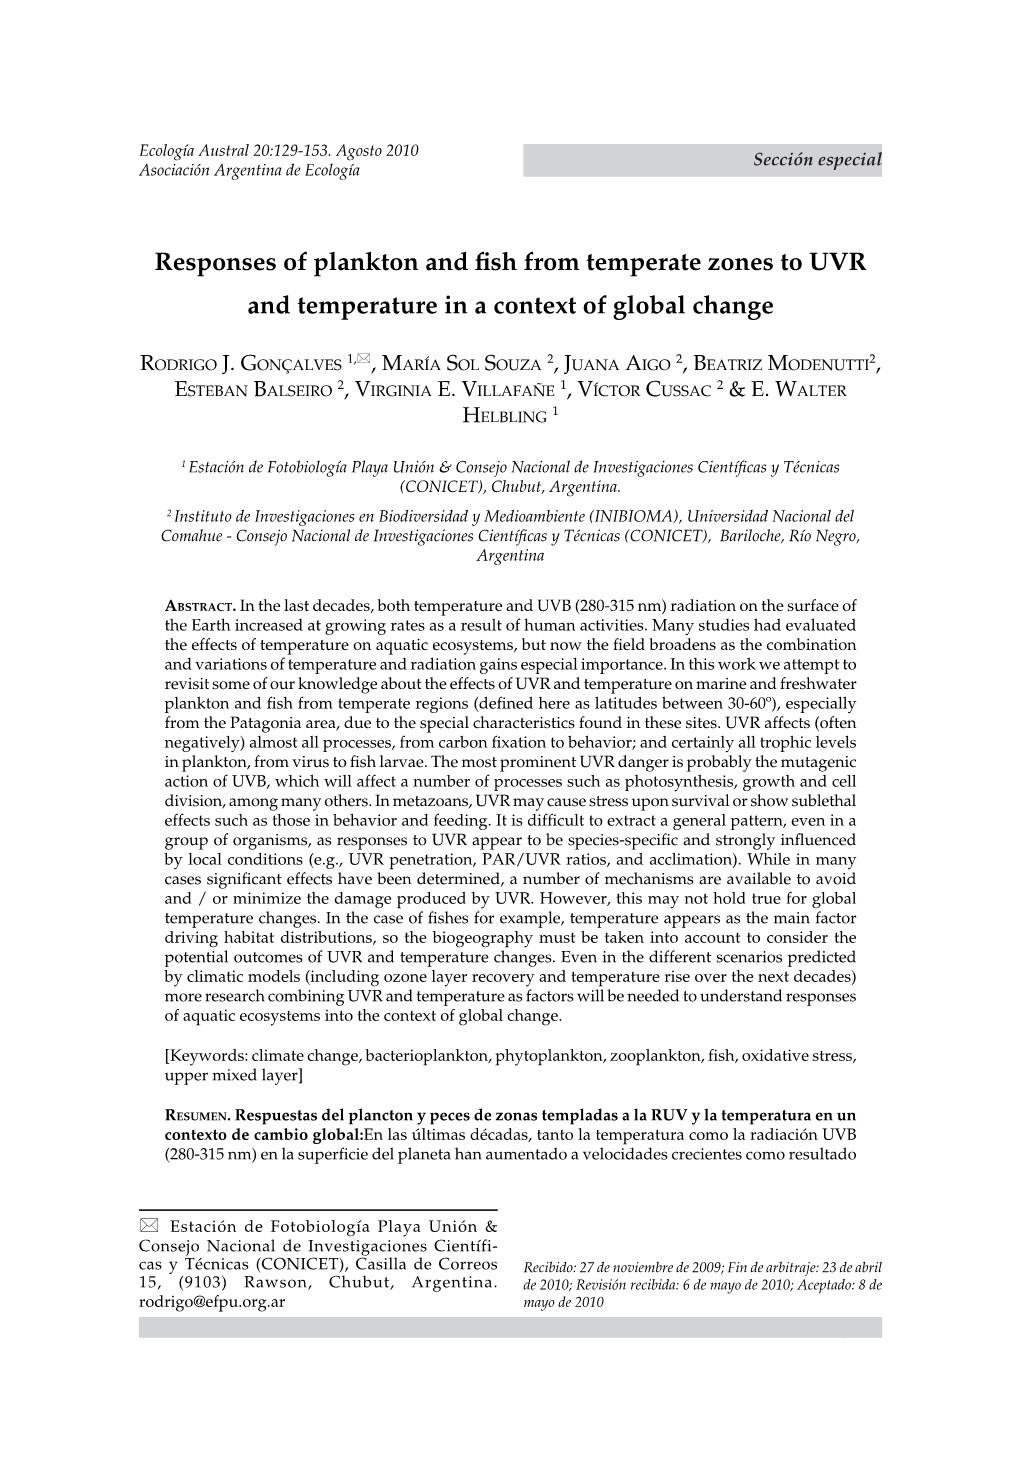 Responses of Plankton and Fish from Temperate Zones to UVR and Temperature in a Context of Global Change